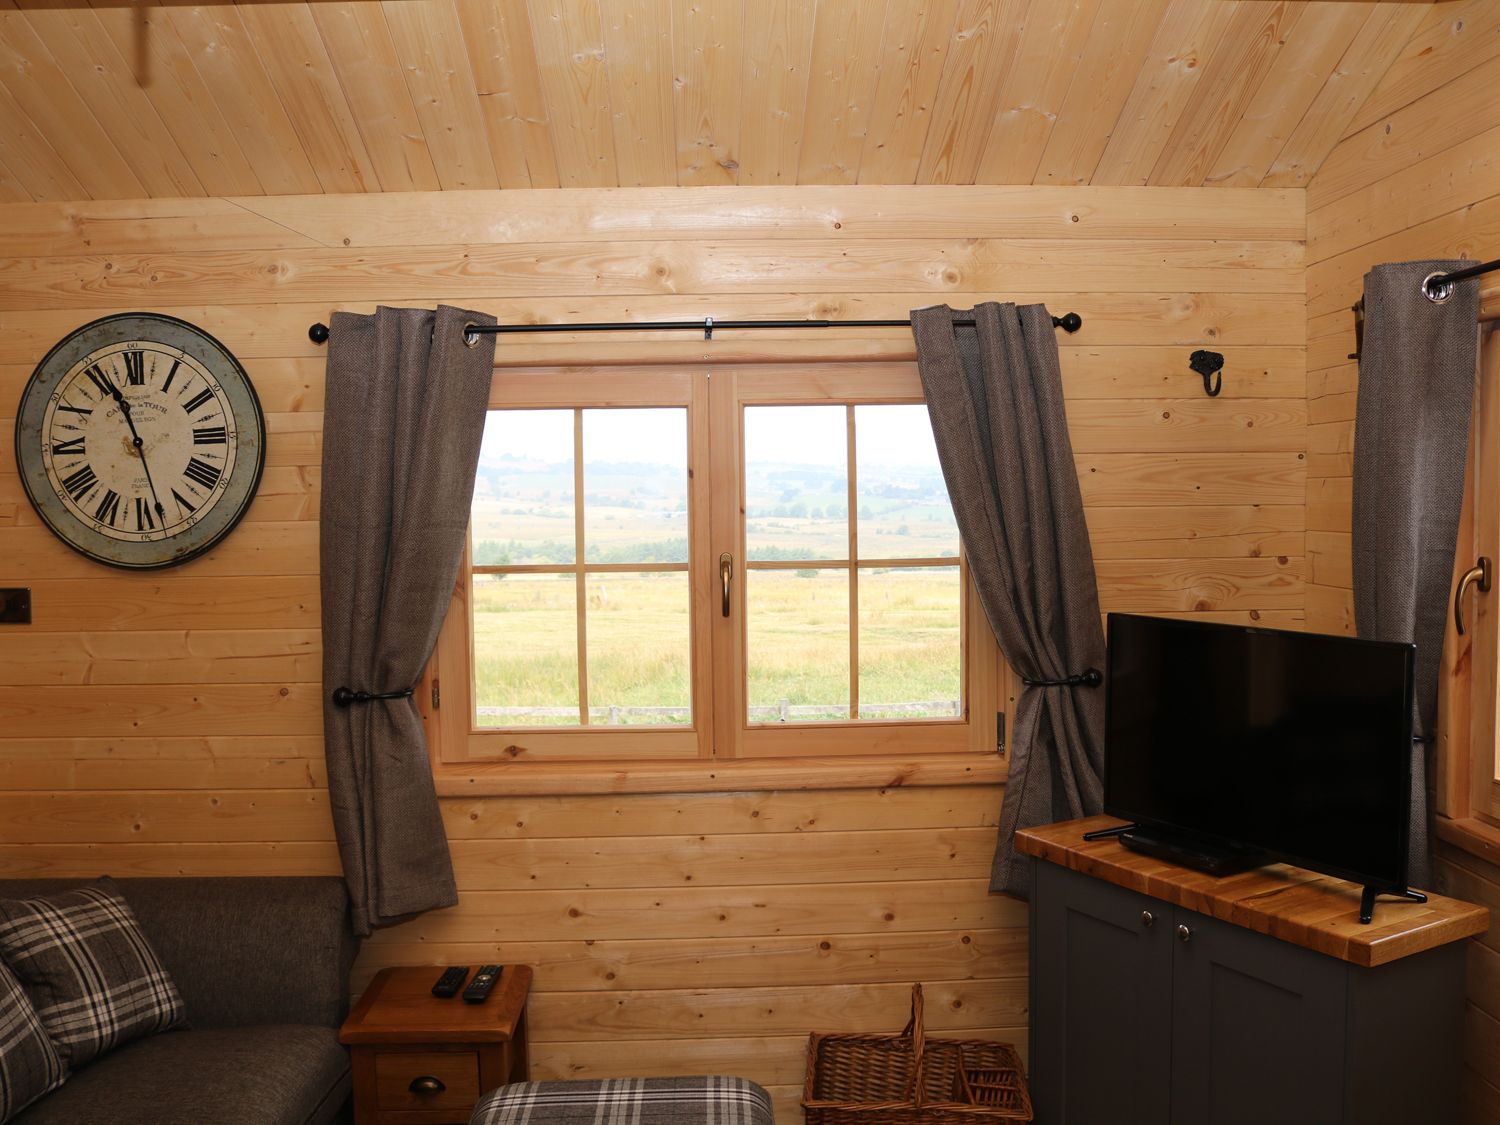 The Shooting Lodge, Peak District National Park